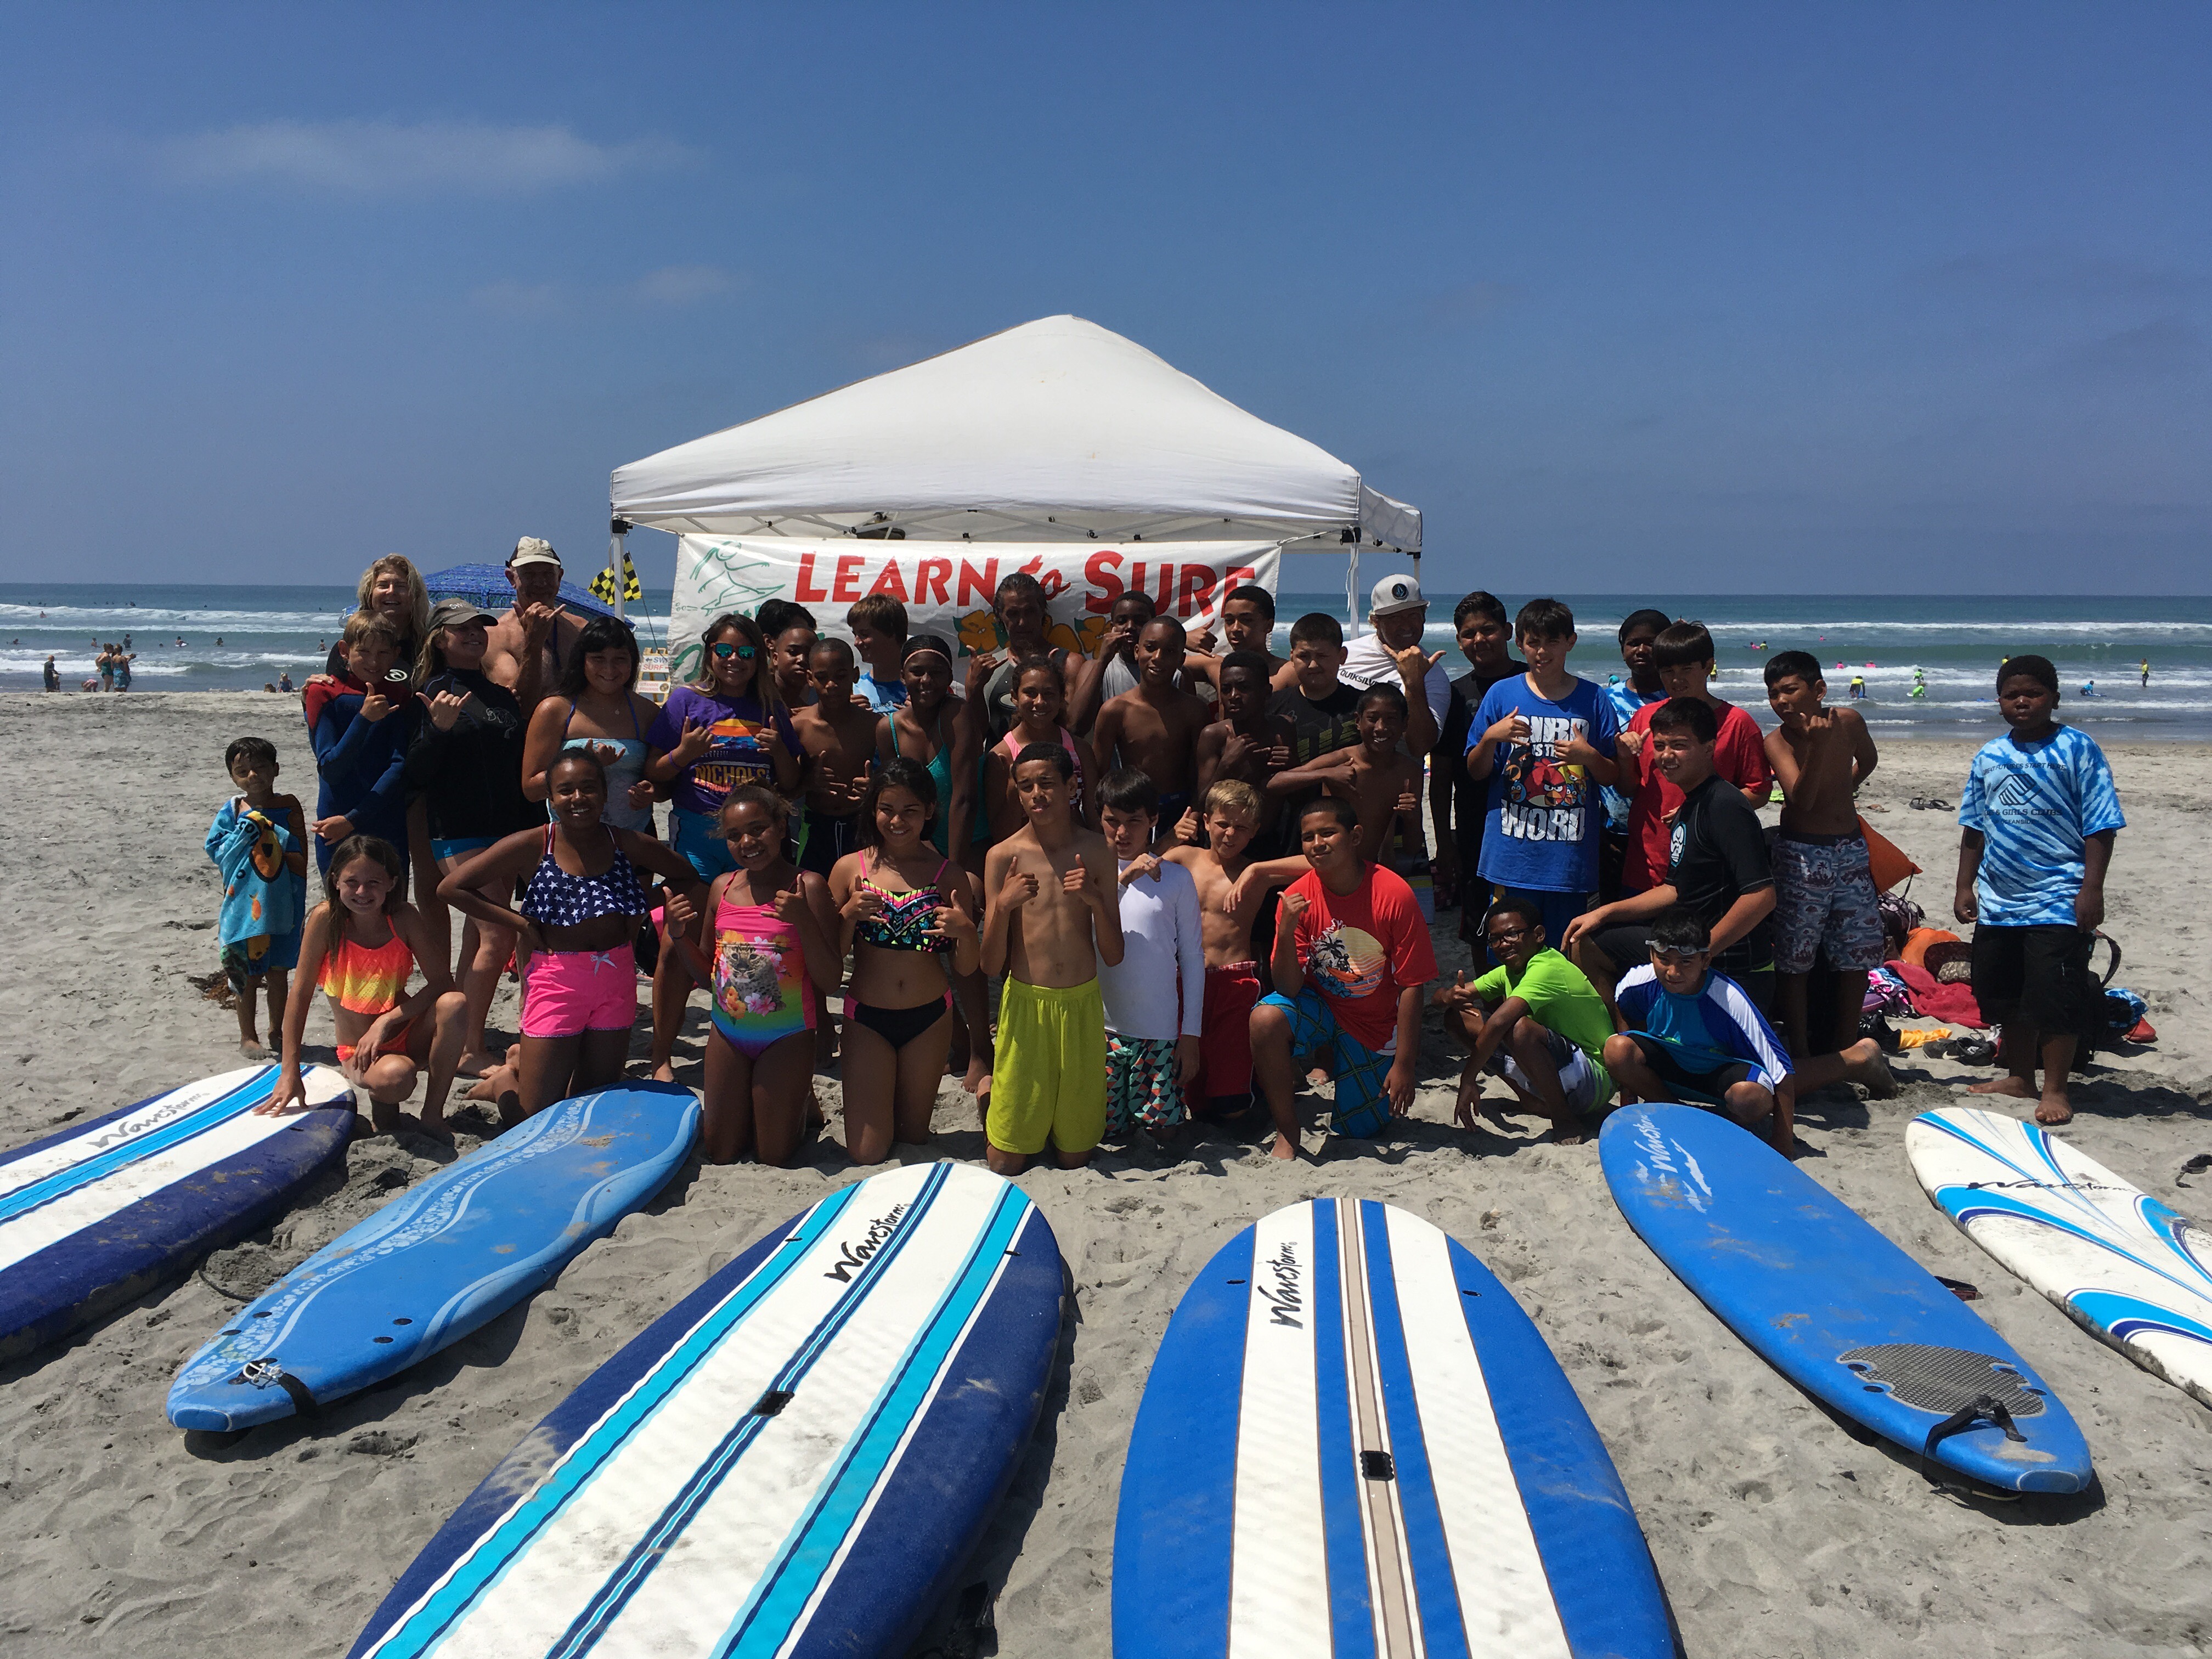 Experience San Diego Surfing Lessons at San Diego Surf [Book Online] -  Hijinks